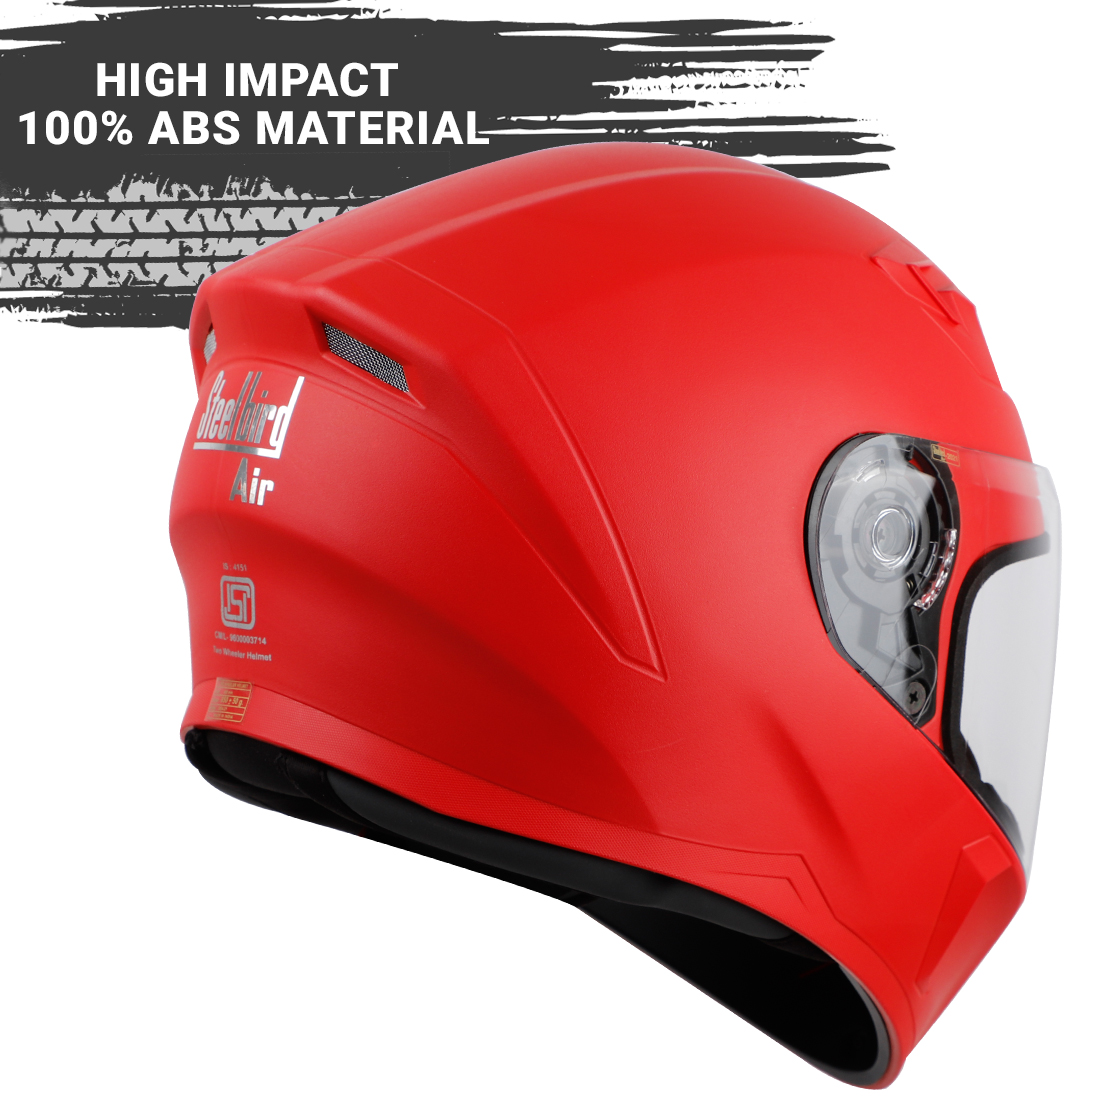 Steelbird SBA-21 GT Full Face ISI Certified Helmet (Dashing Red With Clear Visor)